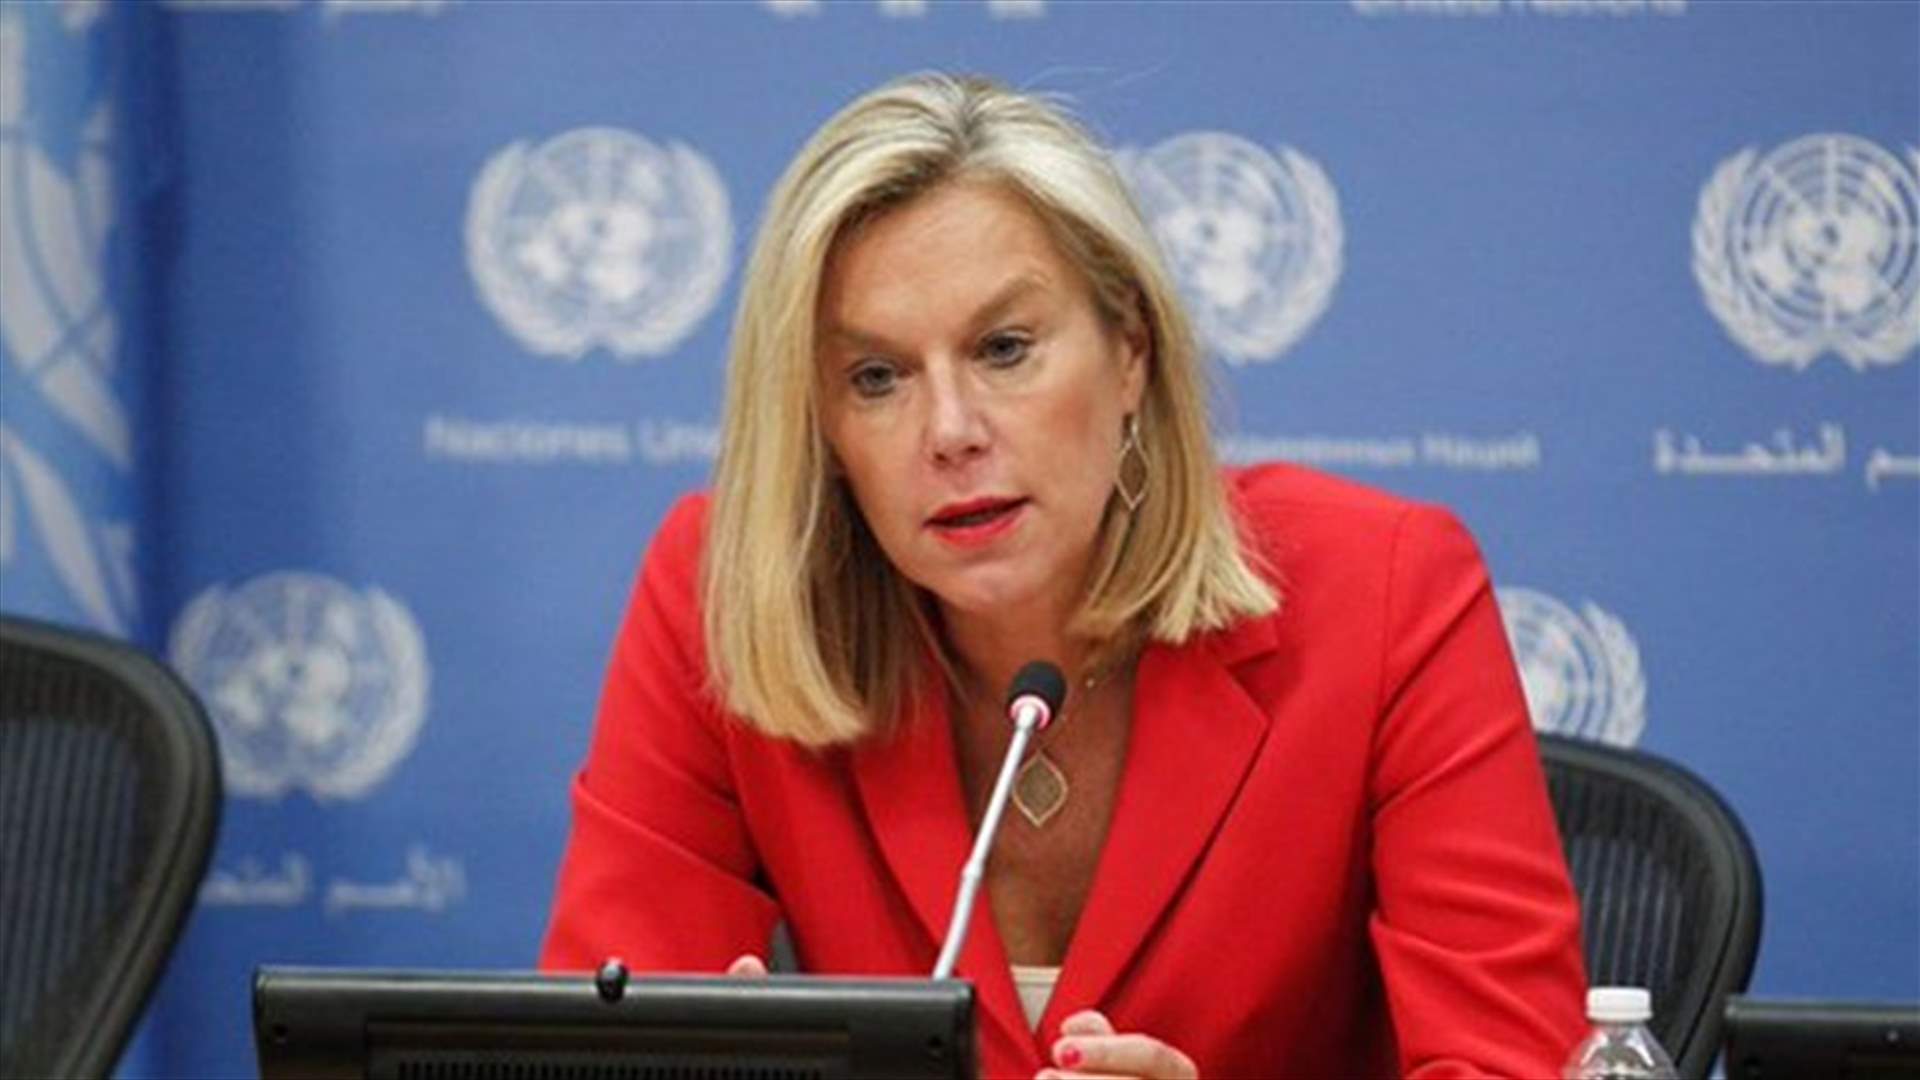 Kaag appointed as Dutch Foreign Affairs Minister